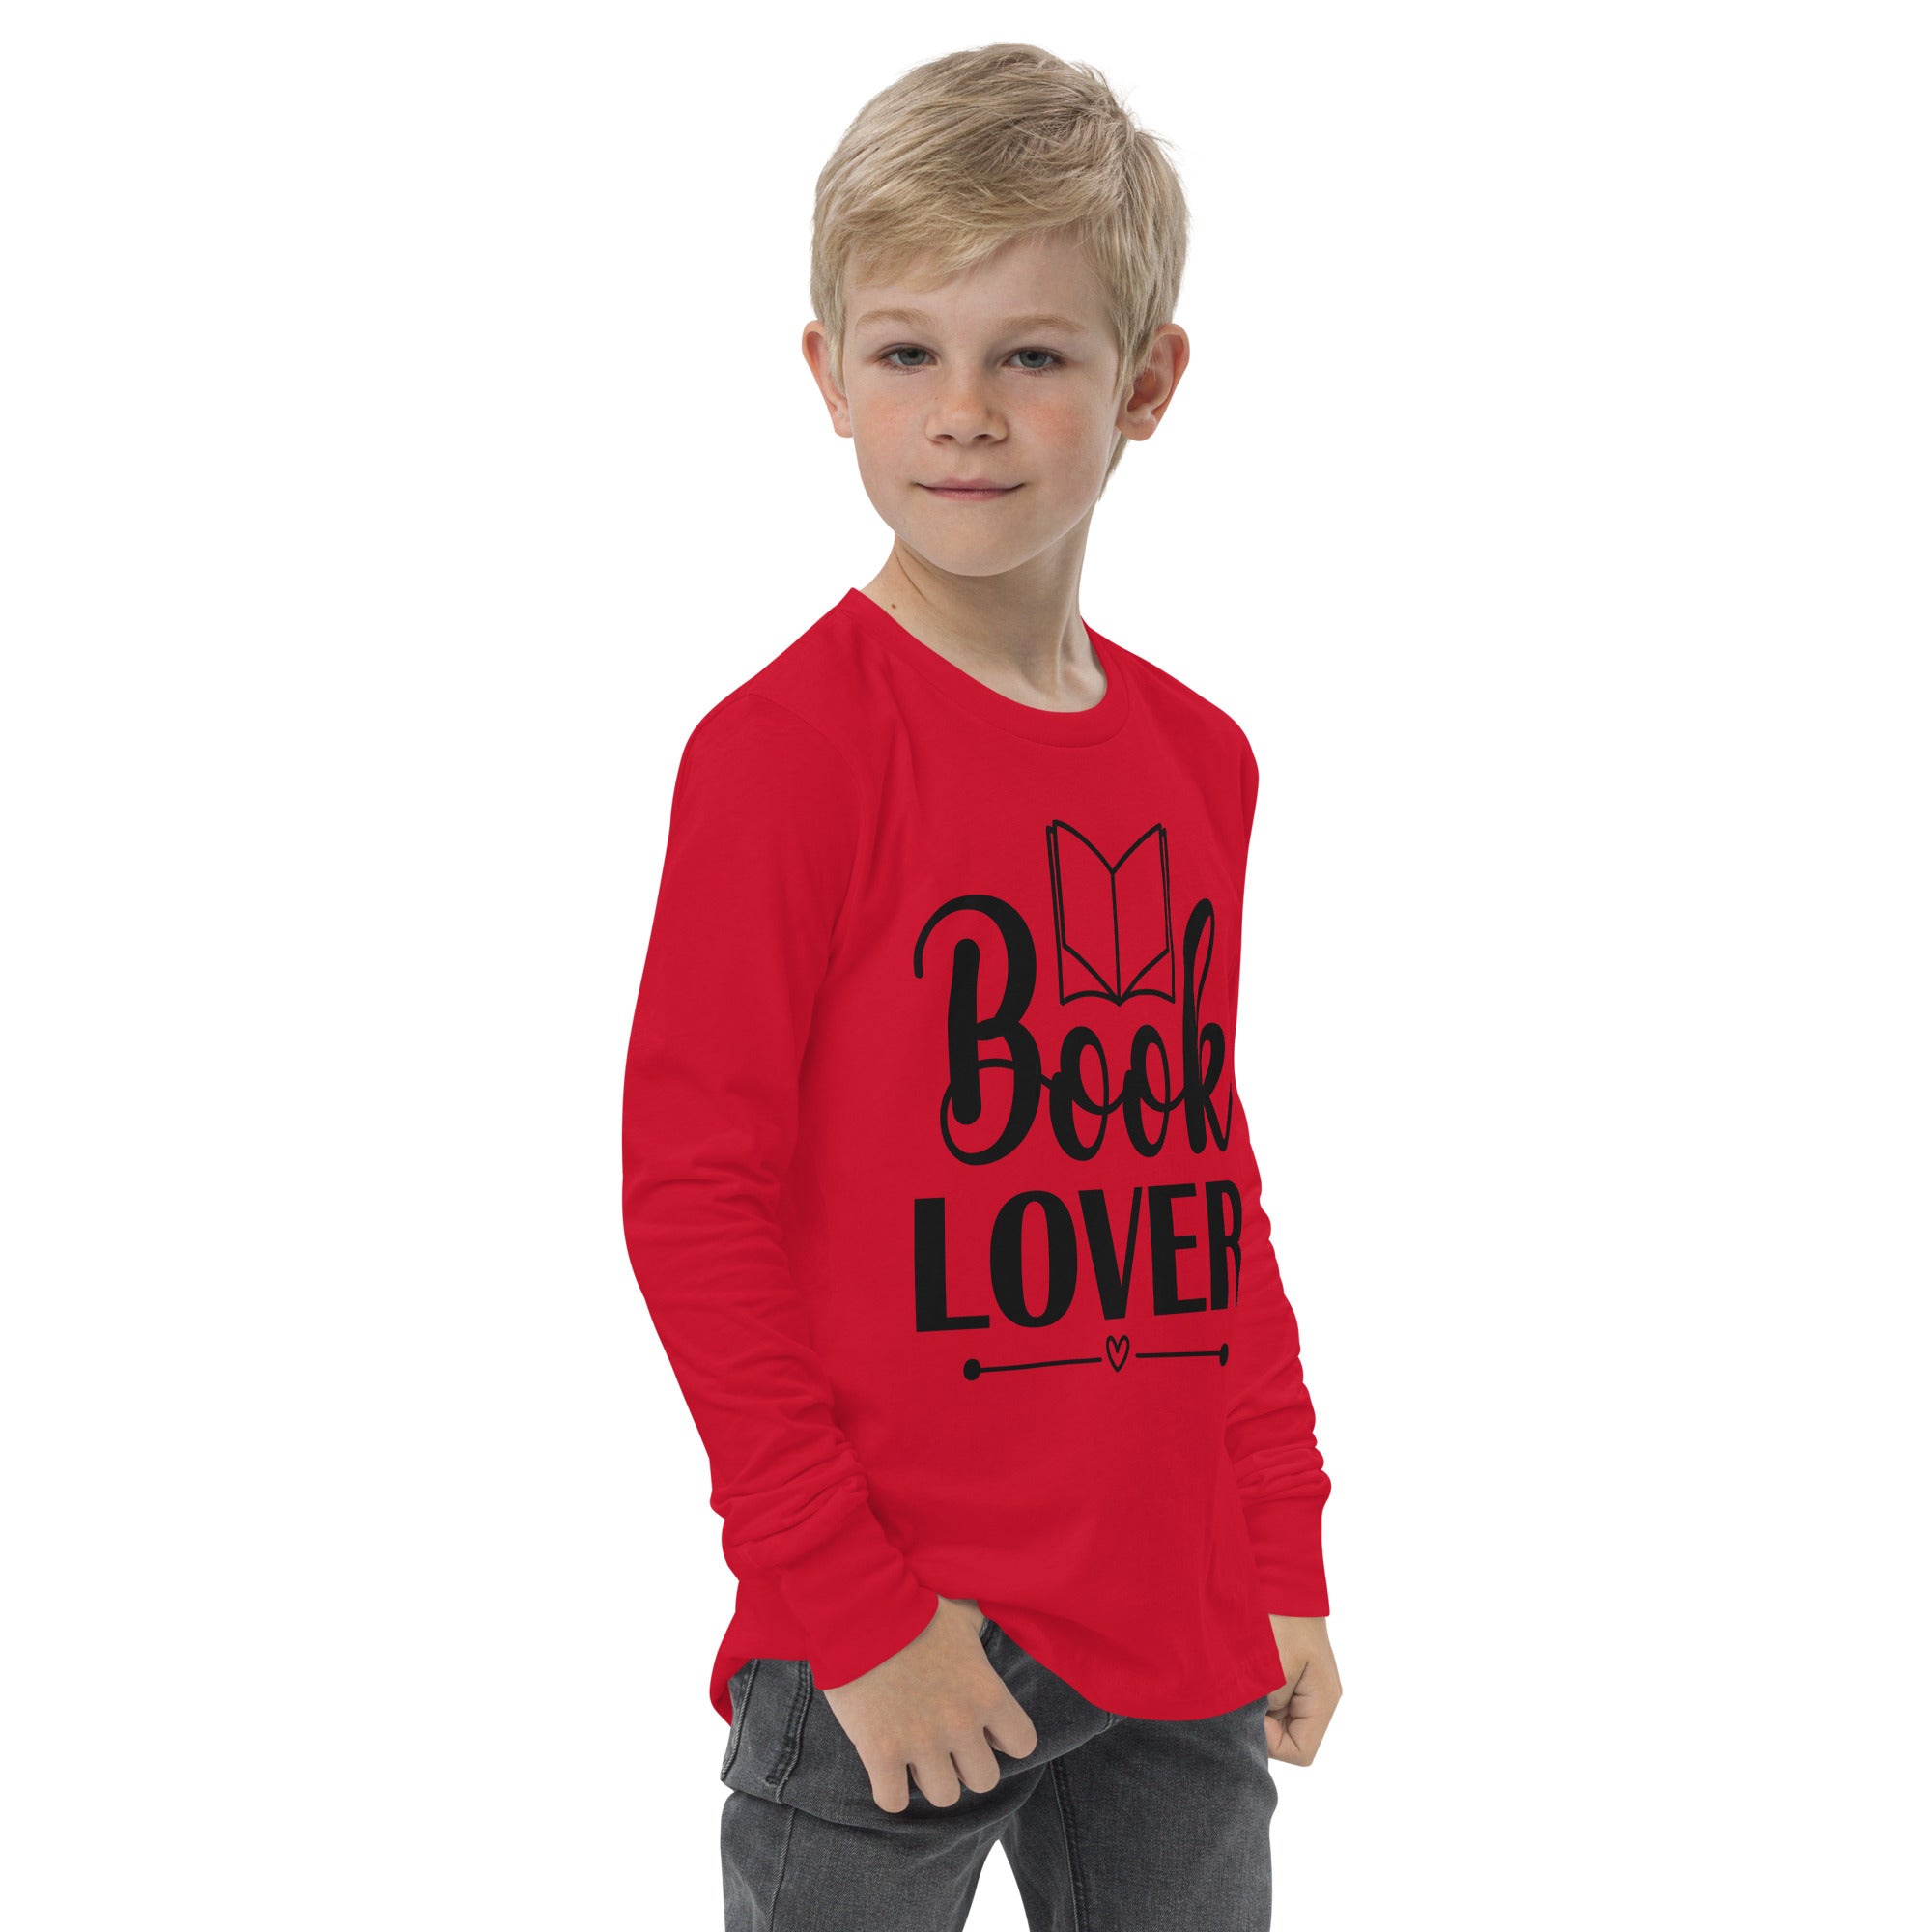 Youth Long-Sleeve-Tee, Back to School T-Shirt- Athletic,100% Combed Cotton